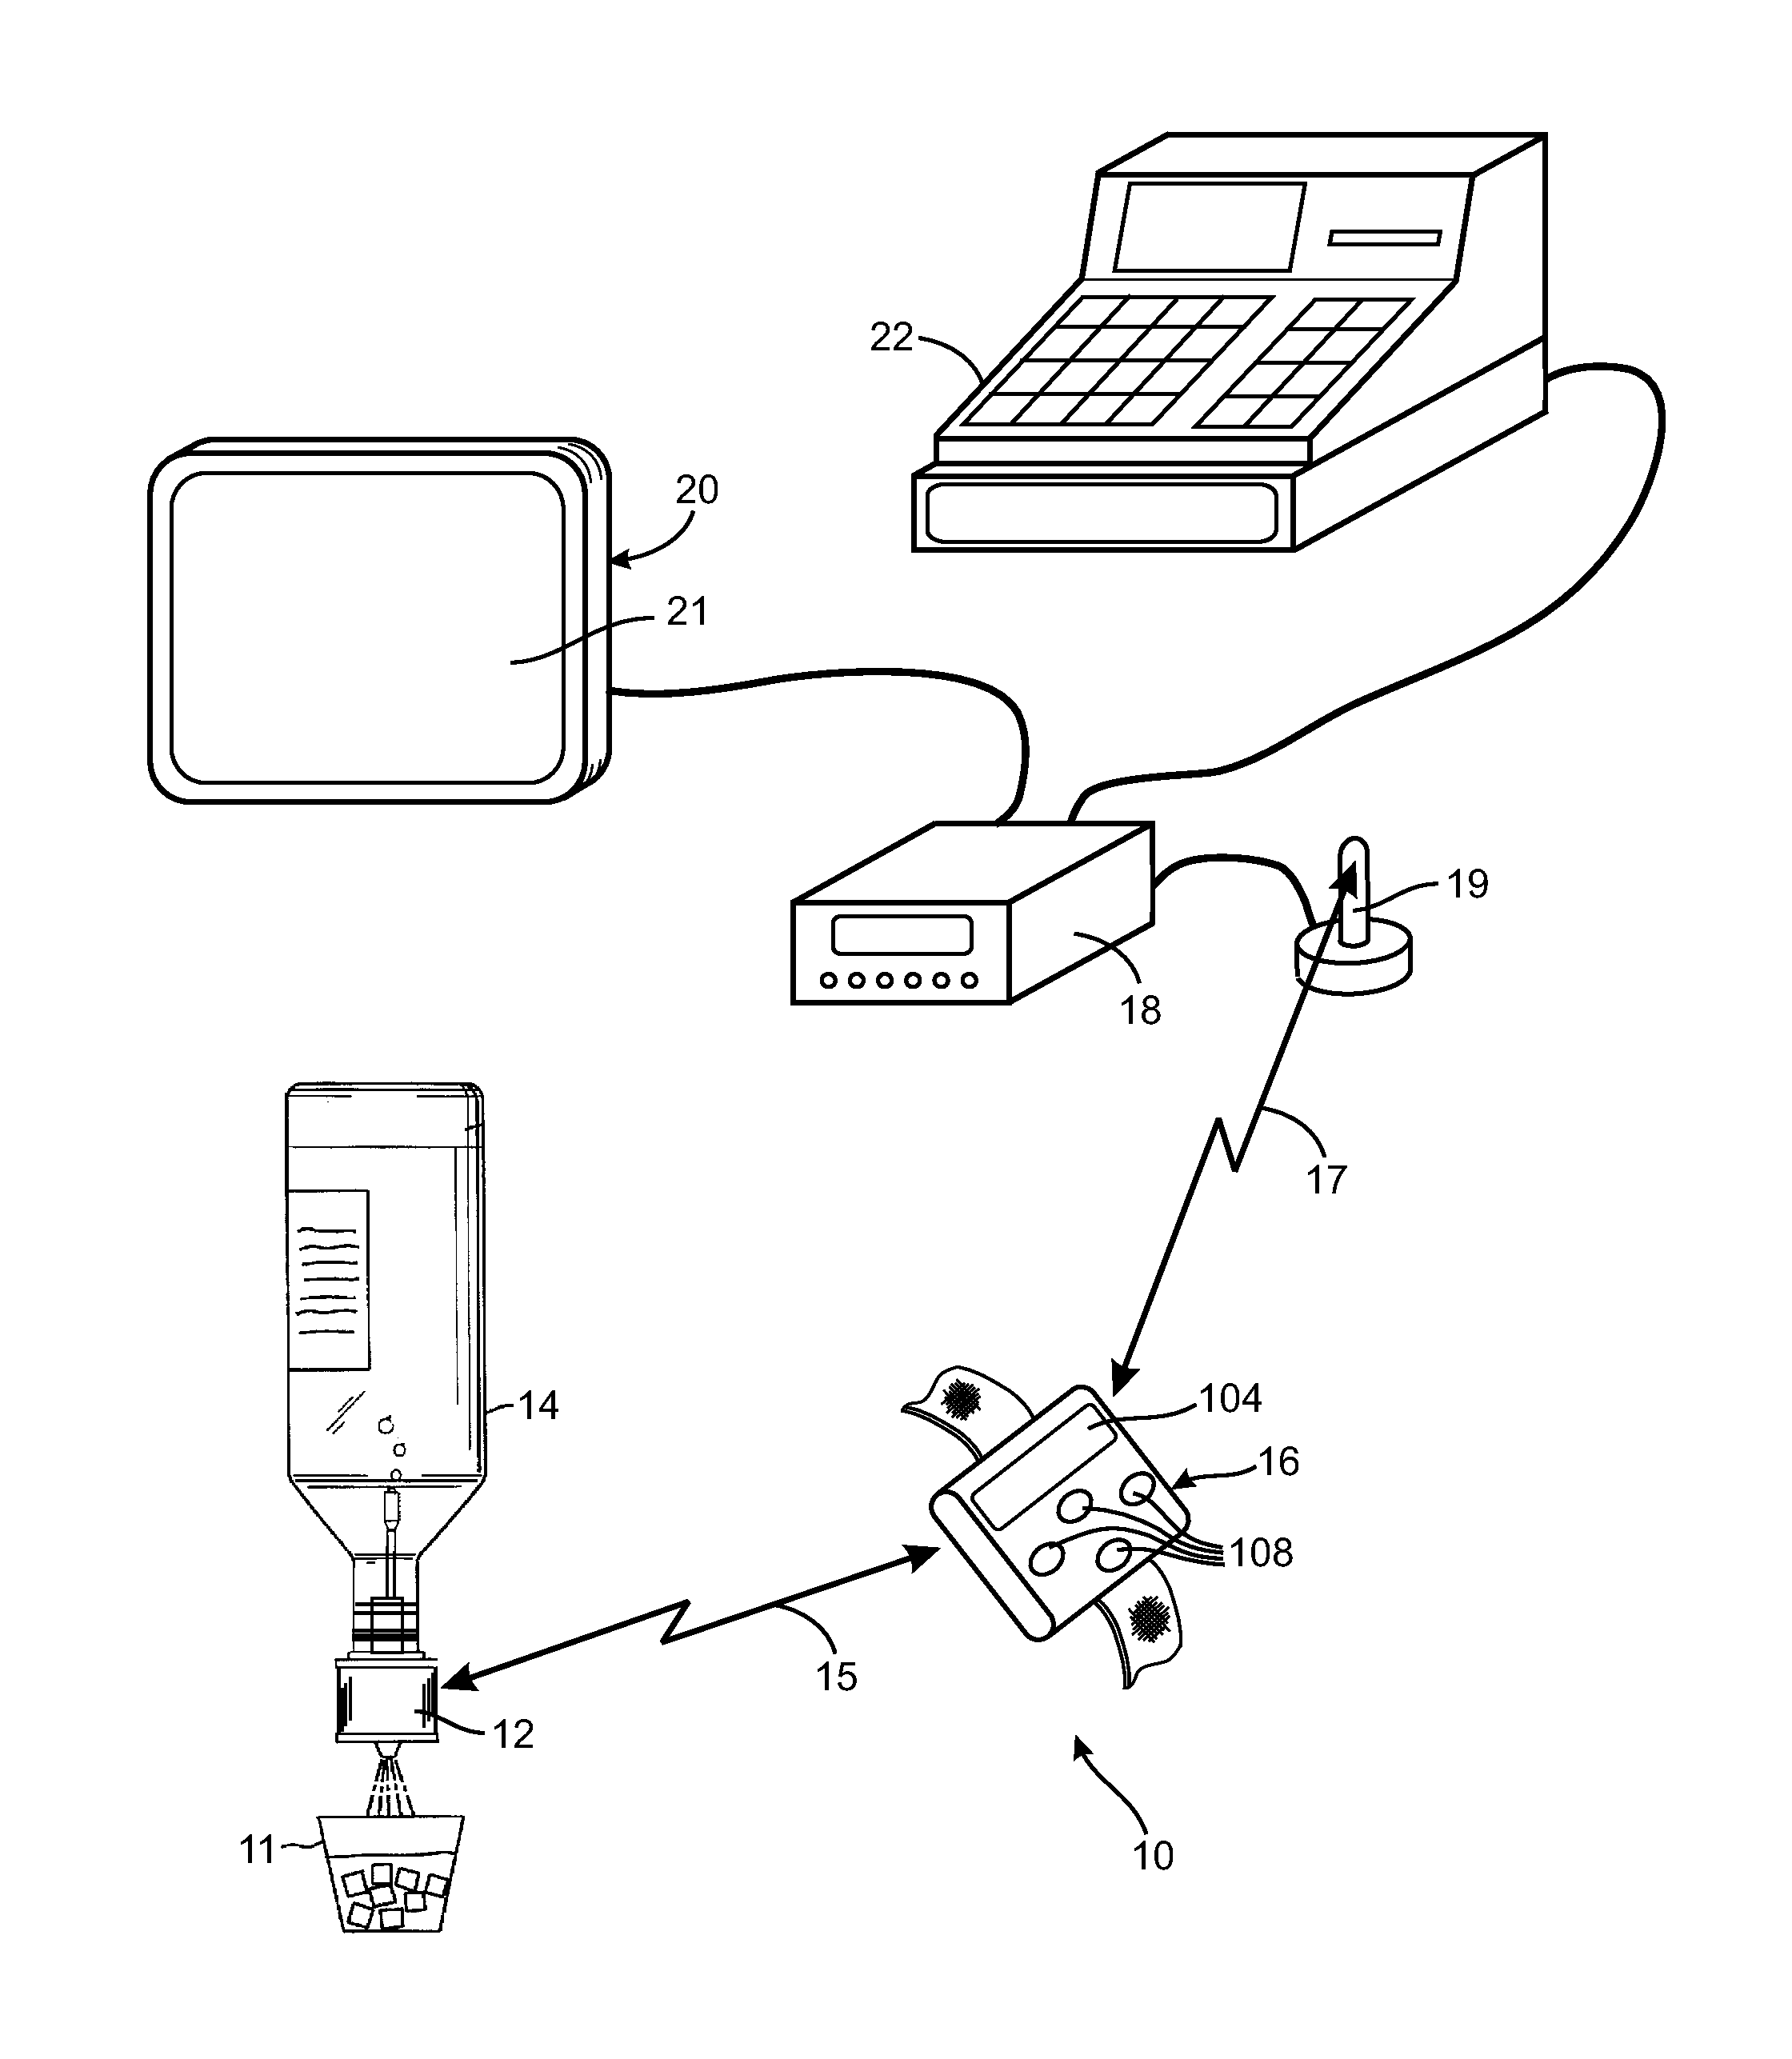 Wireless control system for dispensing beverages from a bottle